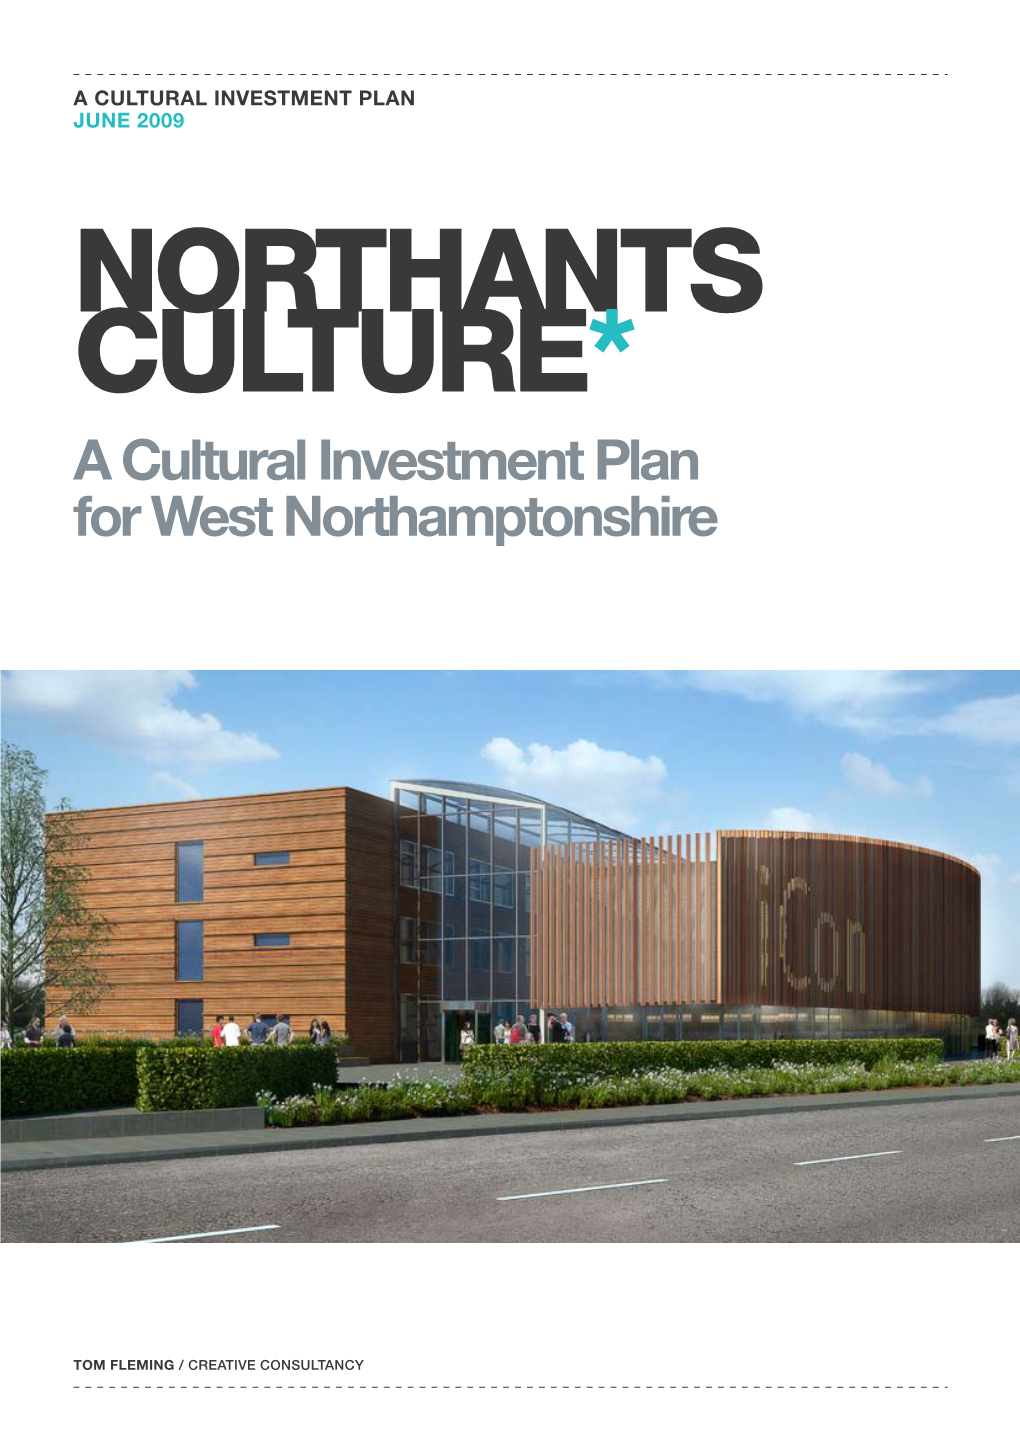 Cultural Investment Plan June 2009 NORTHANTS CULTURE* a Cultural Investment Plan for West Northamptonshire